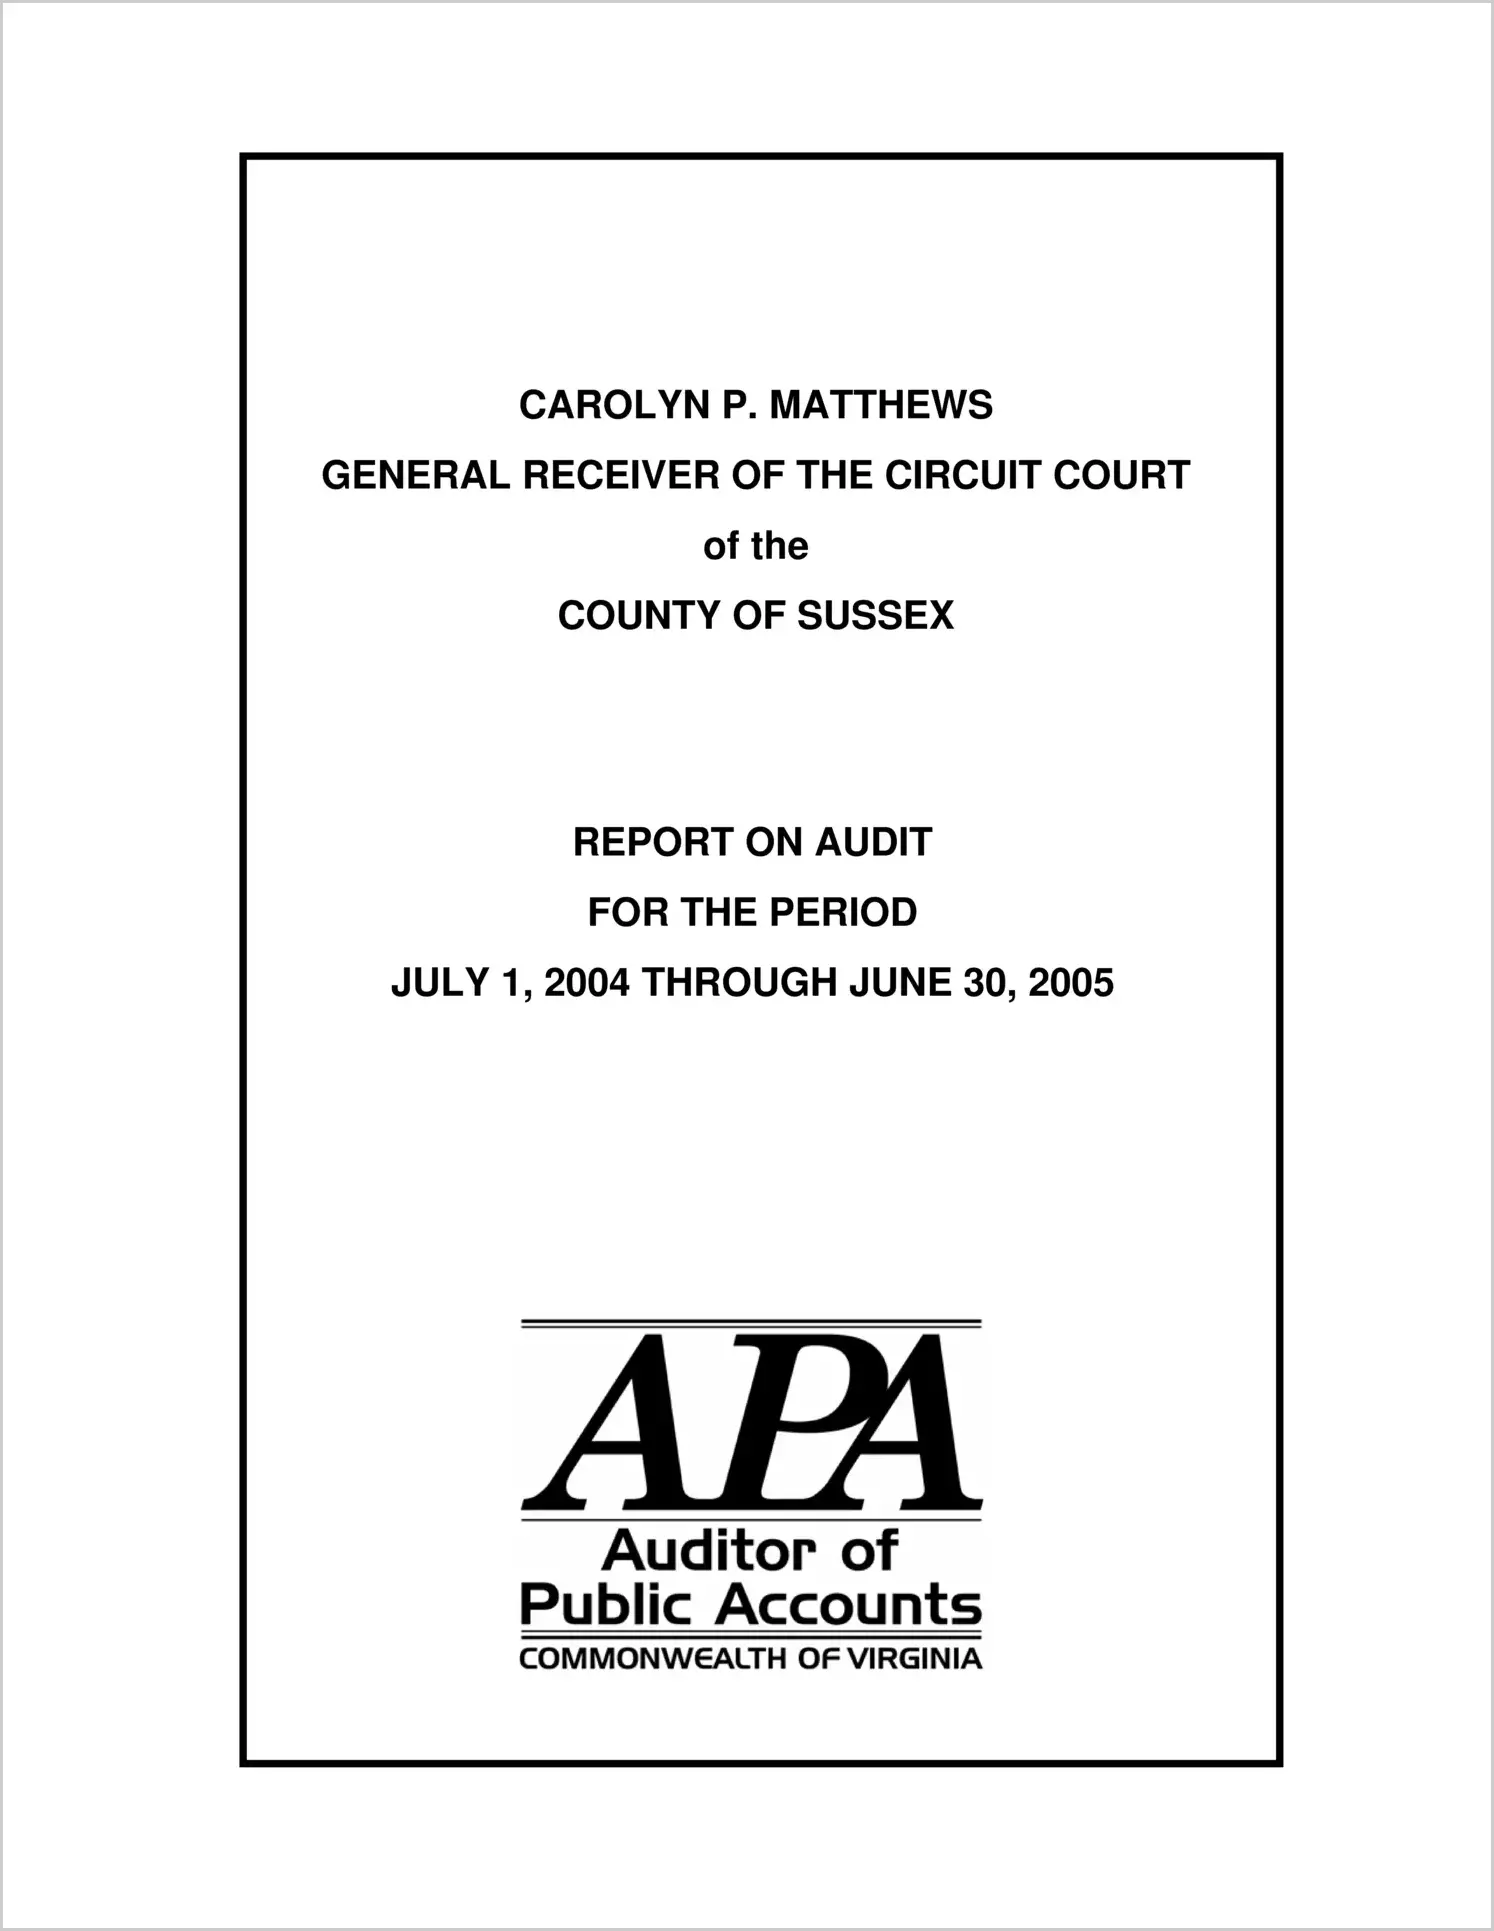 General Receiver of the Circuit Court of the County of Sussex for the period ended July 1, 2004 through June 30, 2005